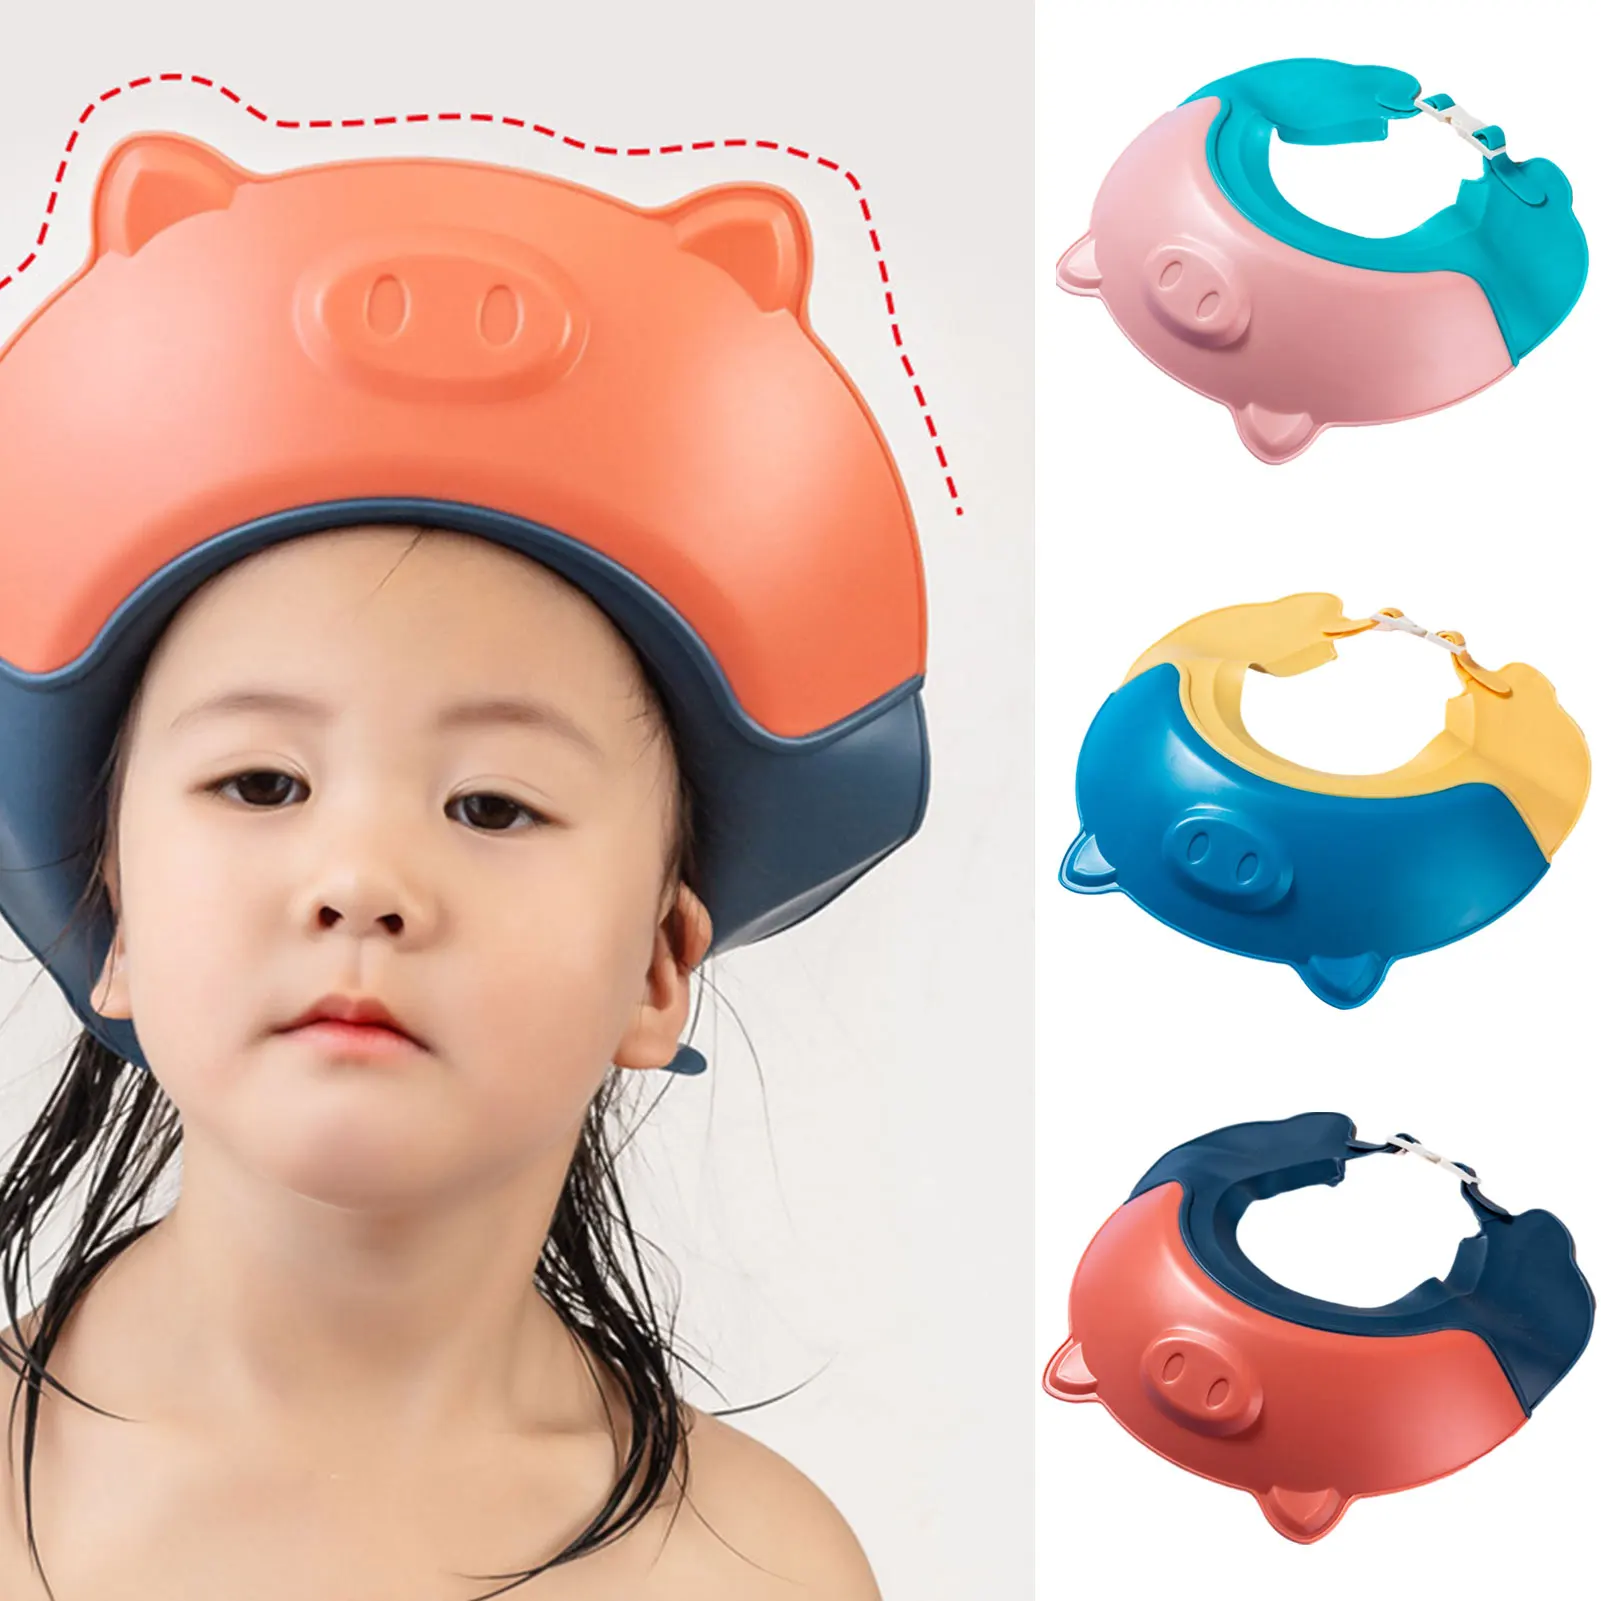 Baby Safe Shampoo Shower Caps Adjustable Bath Protection Caps Hat for Baby Newborn Infant Wash Hair Cover Shield Ear Protector